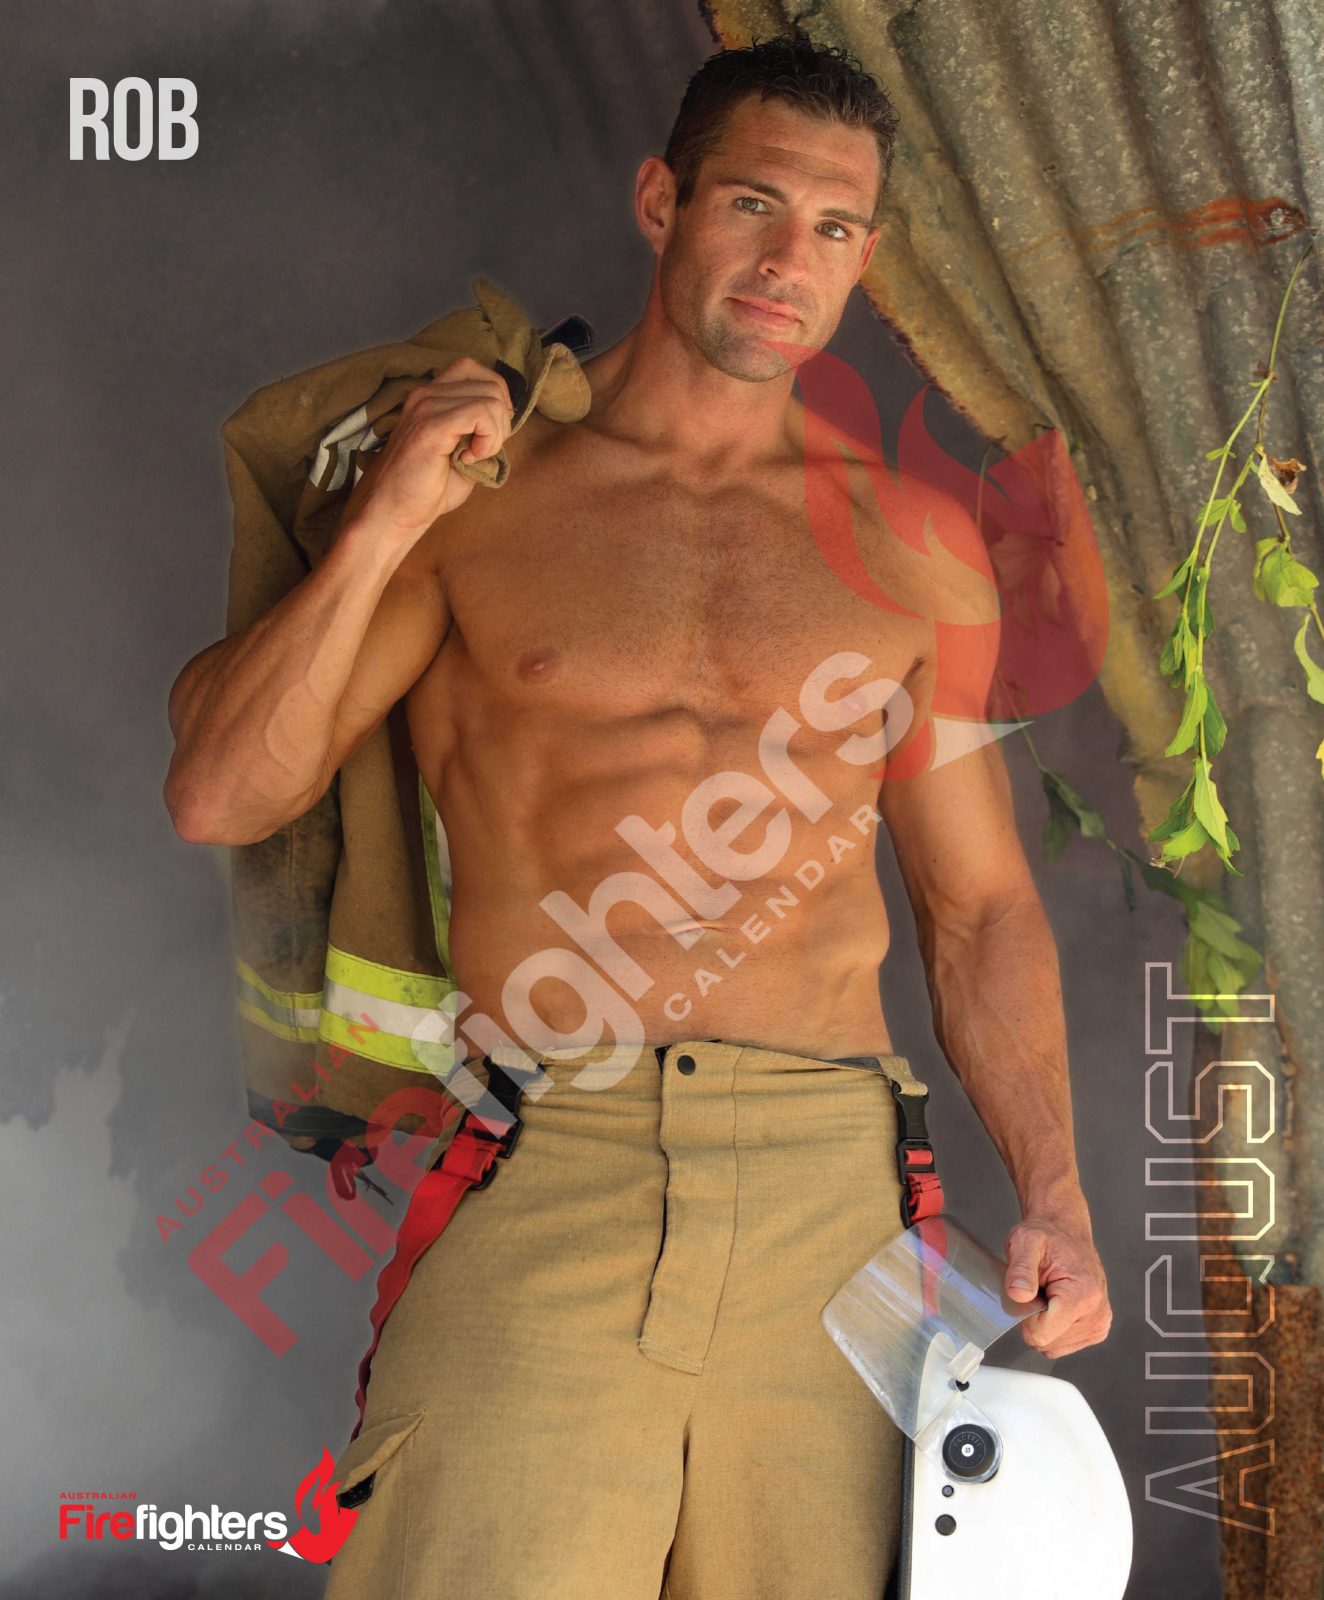 24 Photos From The 2018 Australian Firefighters Calendars